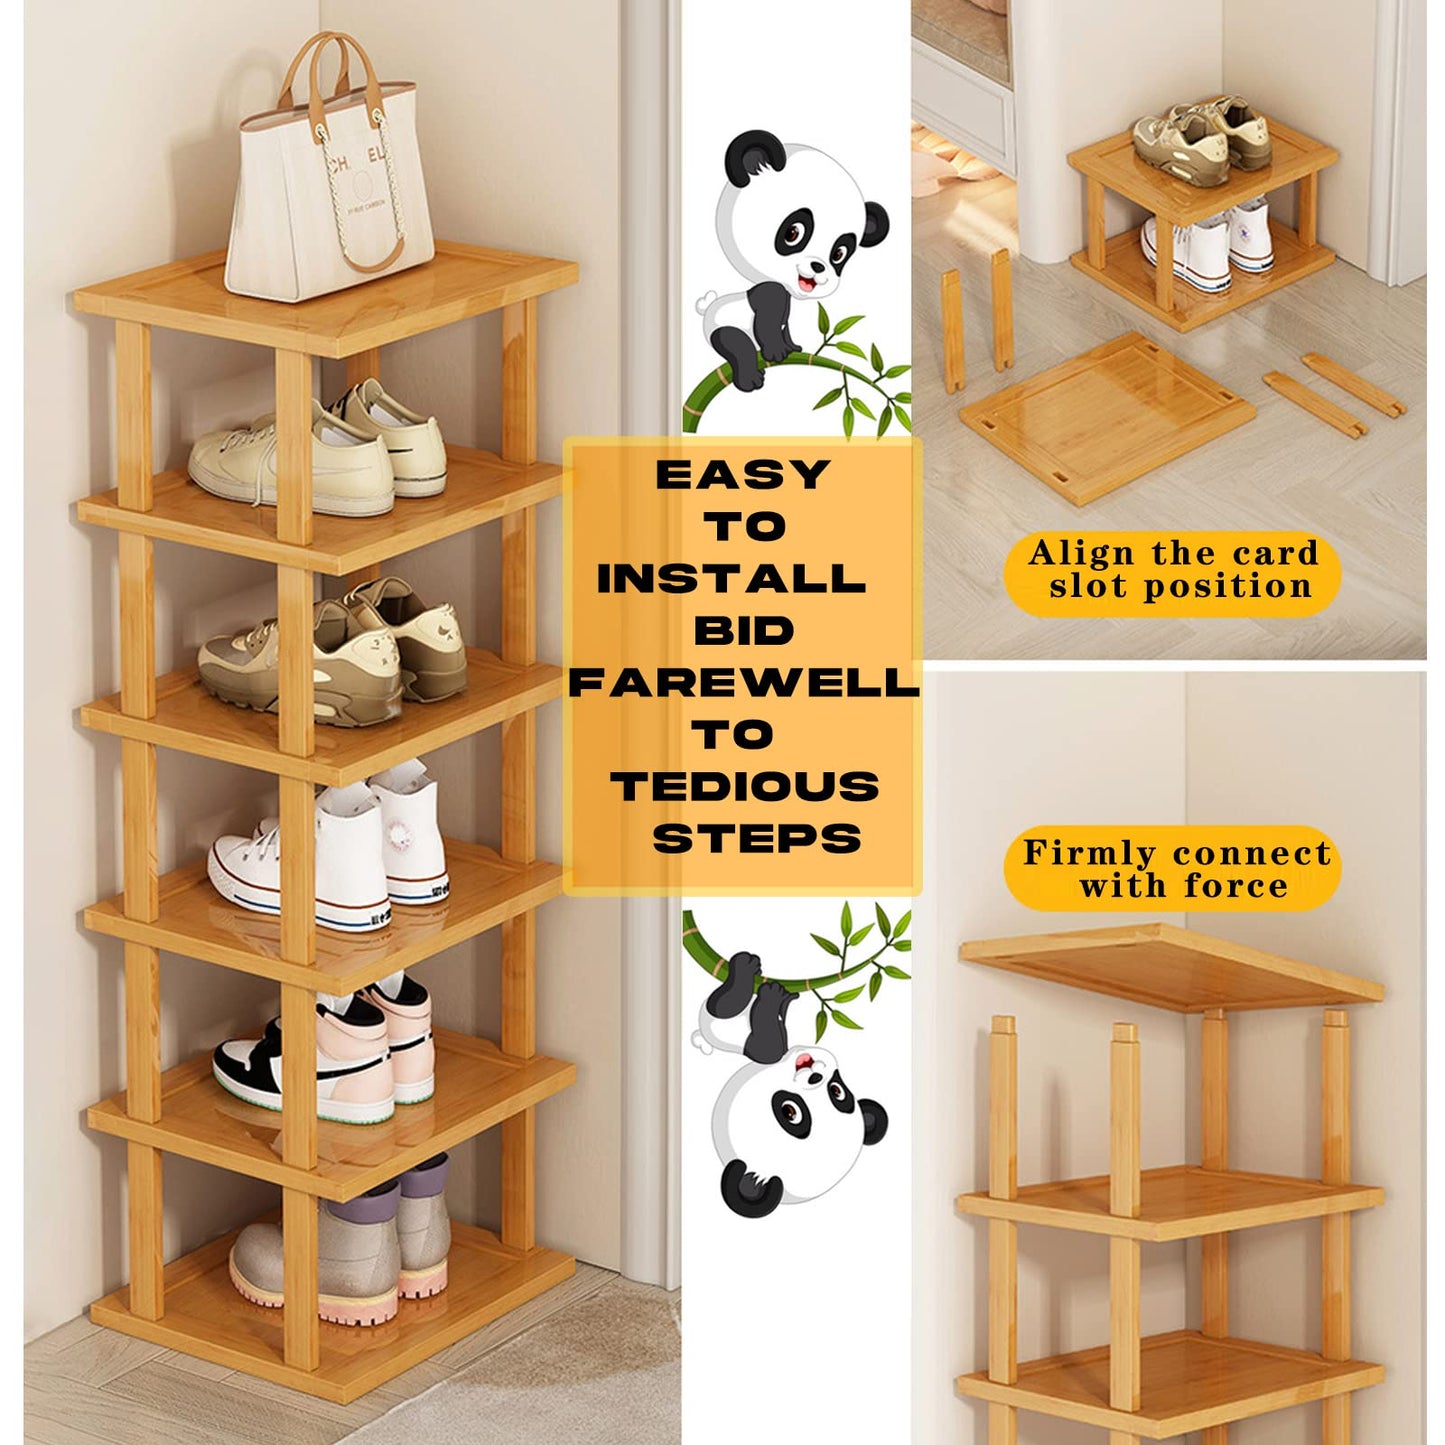 Bamboo Shoe Rack - Vertical Shoe Rack for Small Spaces, Tall Narrow Shoe Rack Organizer for Closet Entryway Corner Garage and Bedroom,Skinny Shoe Shelf Free Stackable DIY - Space Saving Storage